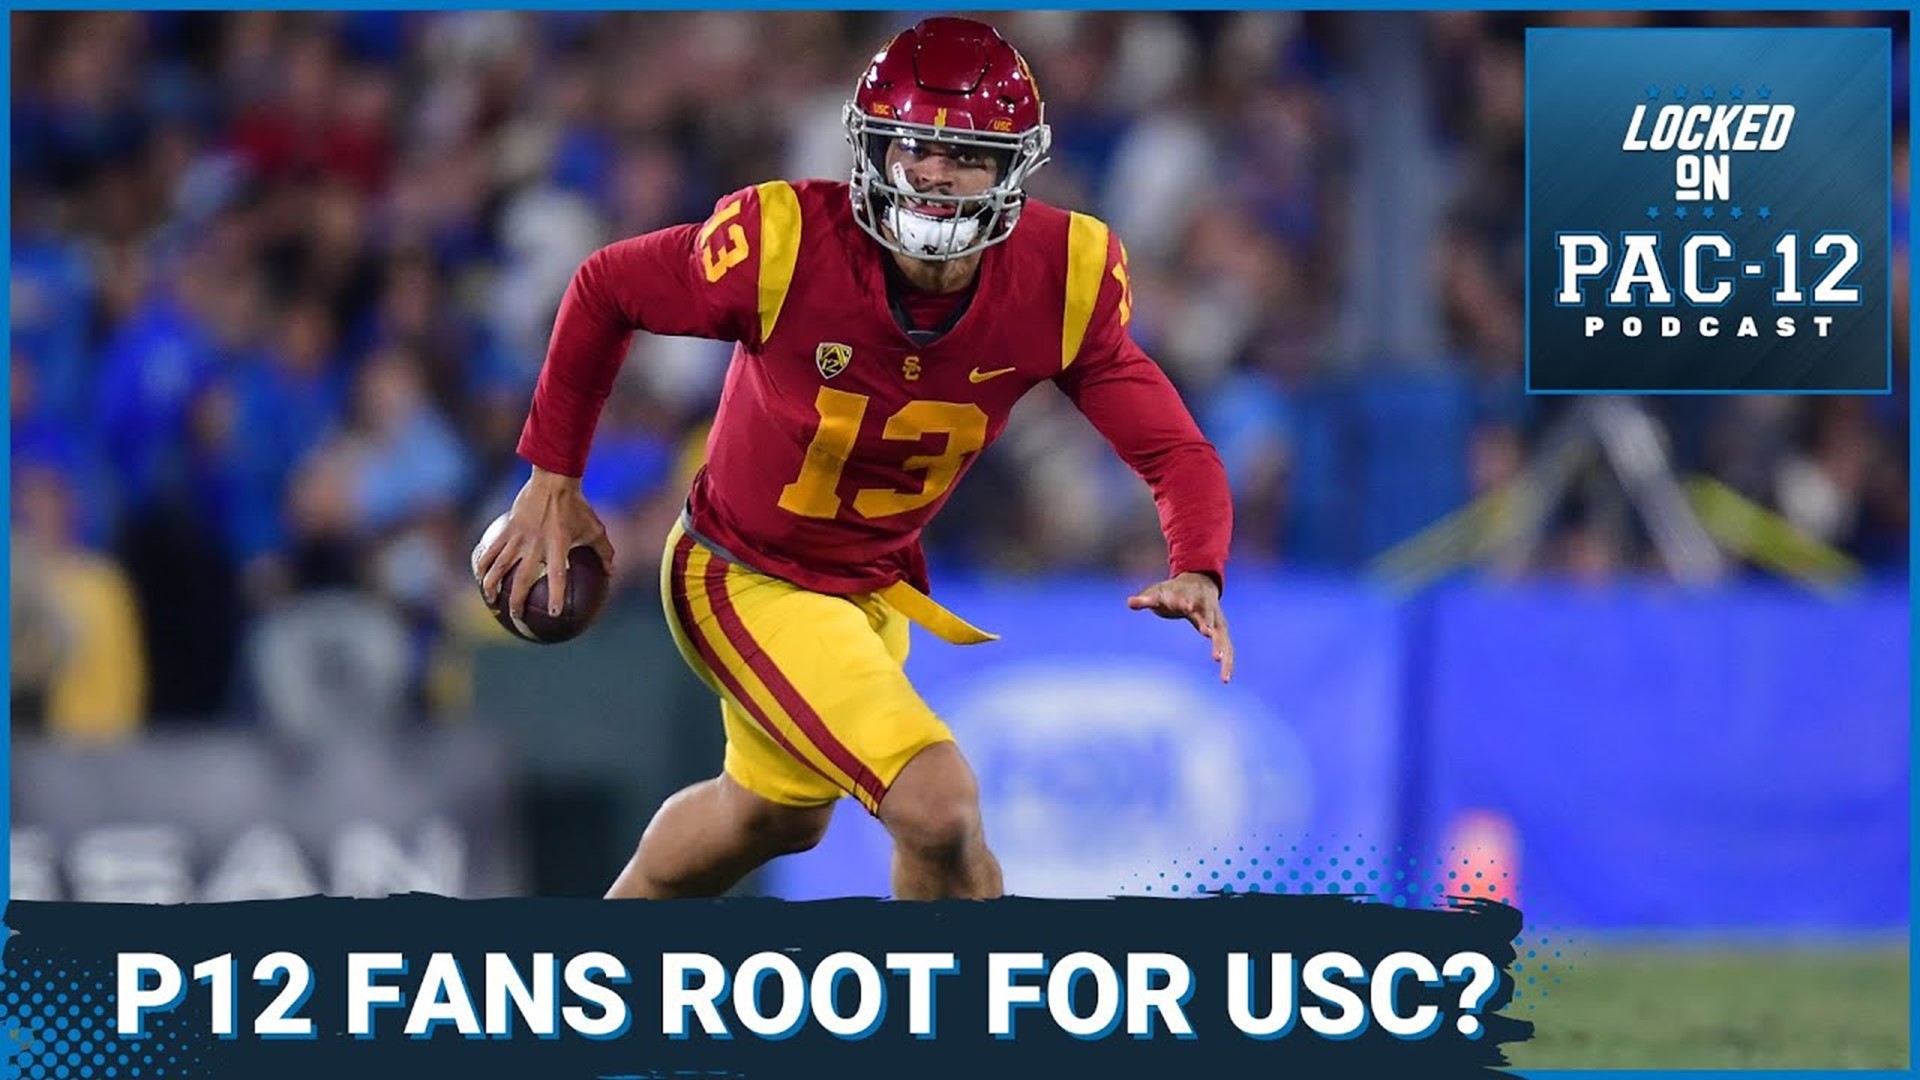 USC has a real chance to make the College Football Playoff, but with the Trojans leaving the league, should the remaining teams be cheering for them?